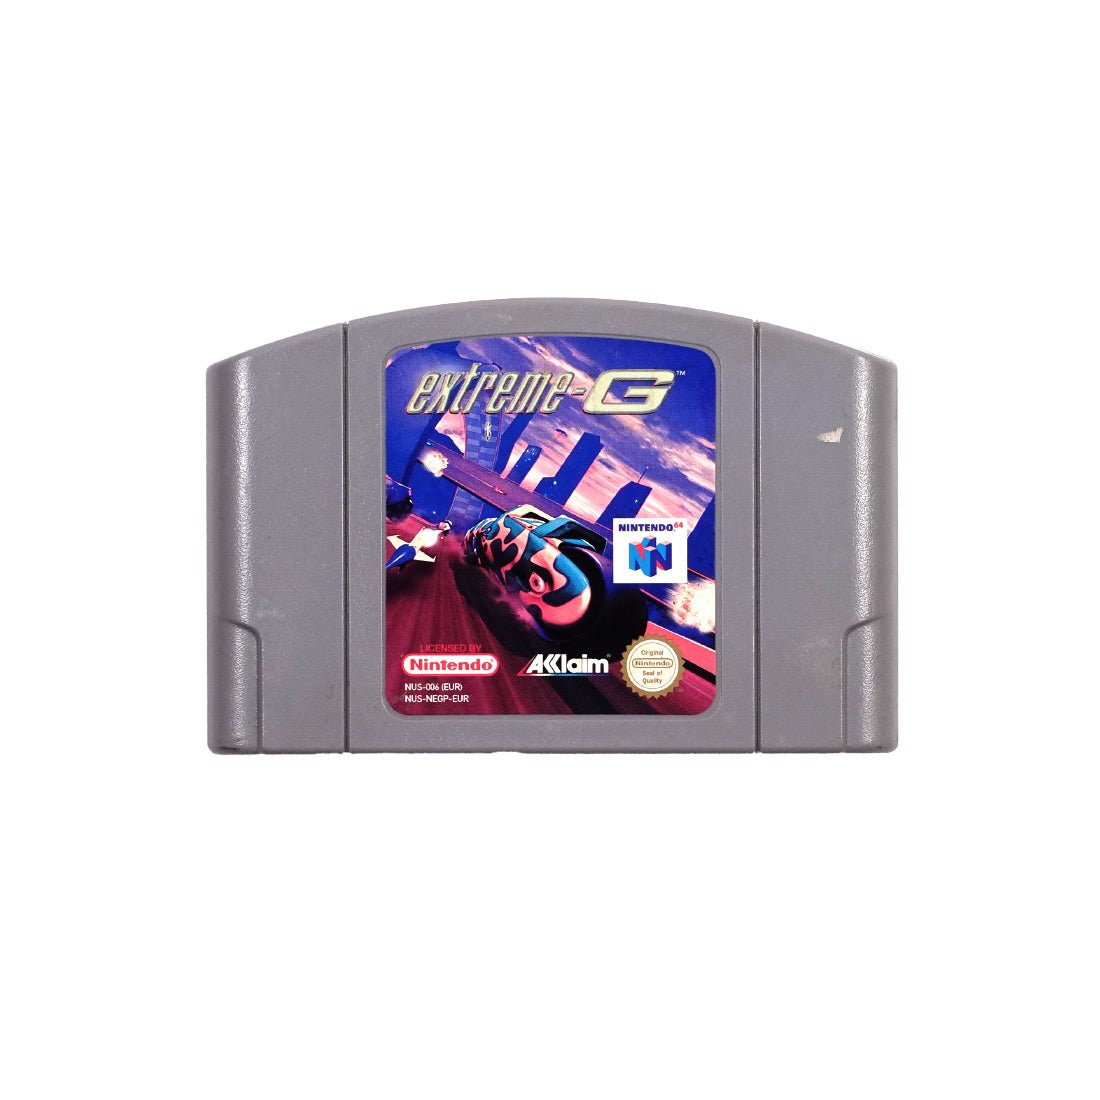 (Pre-Owned) Extreme G - Nintendo 64 - Store 974 | ستور ٩٧٤